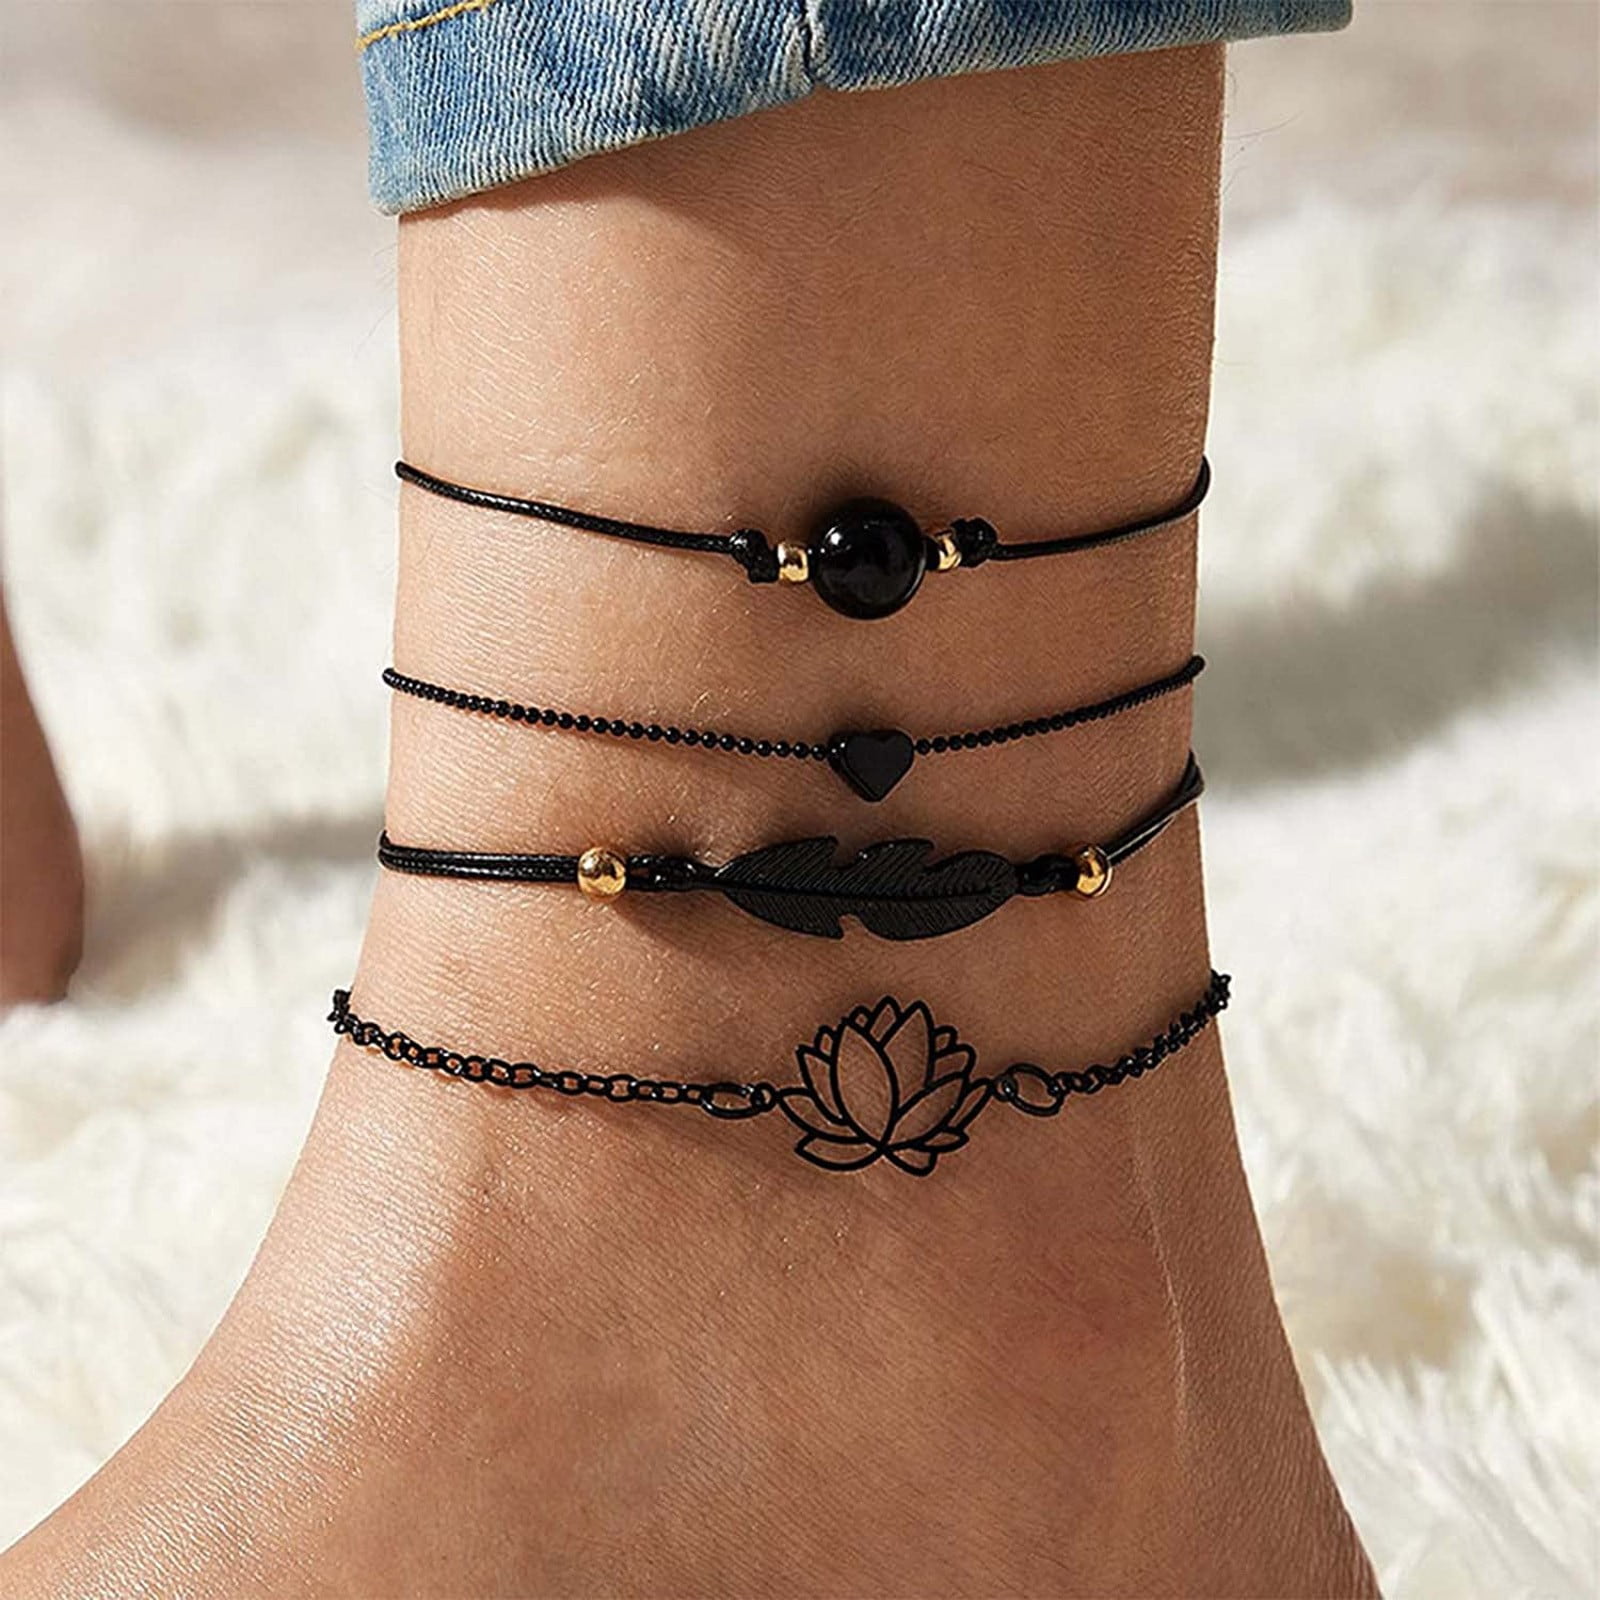 Elegant Black Lace Crochet Anklet For Women Summer Beach Foot Accessory  From Jewelryset, $0.73 | DHgate.Com